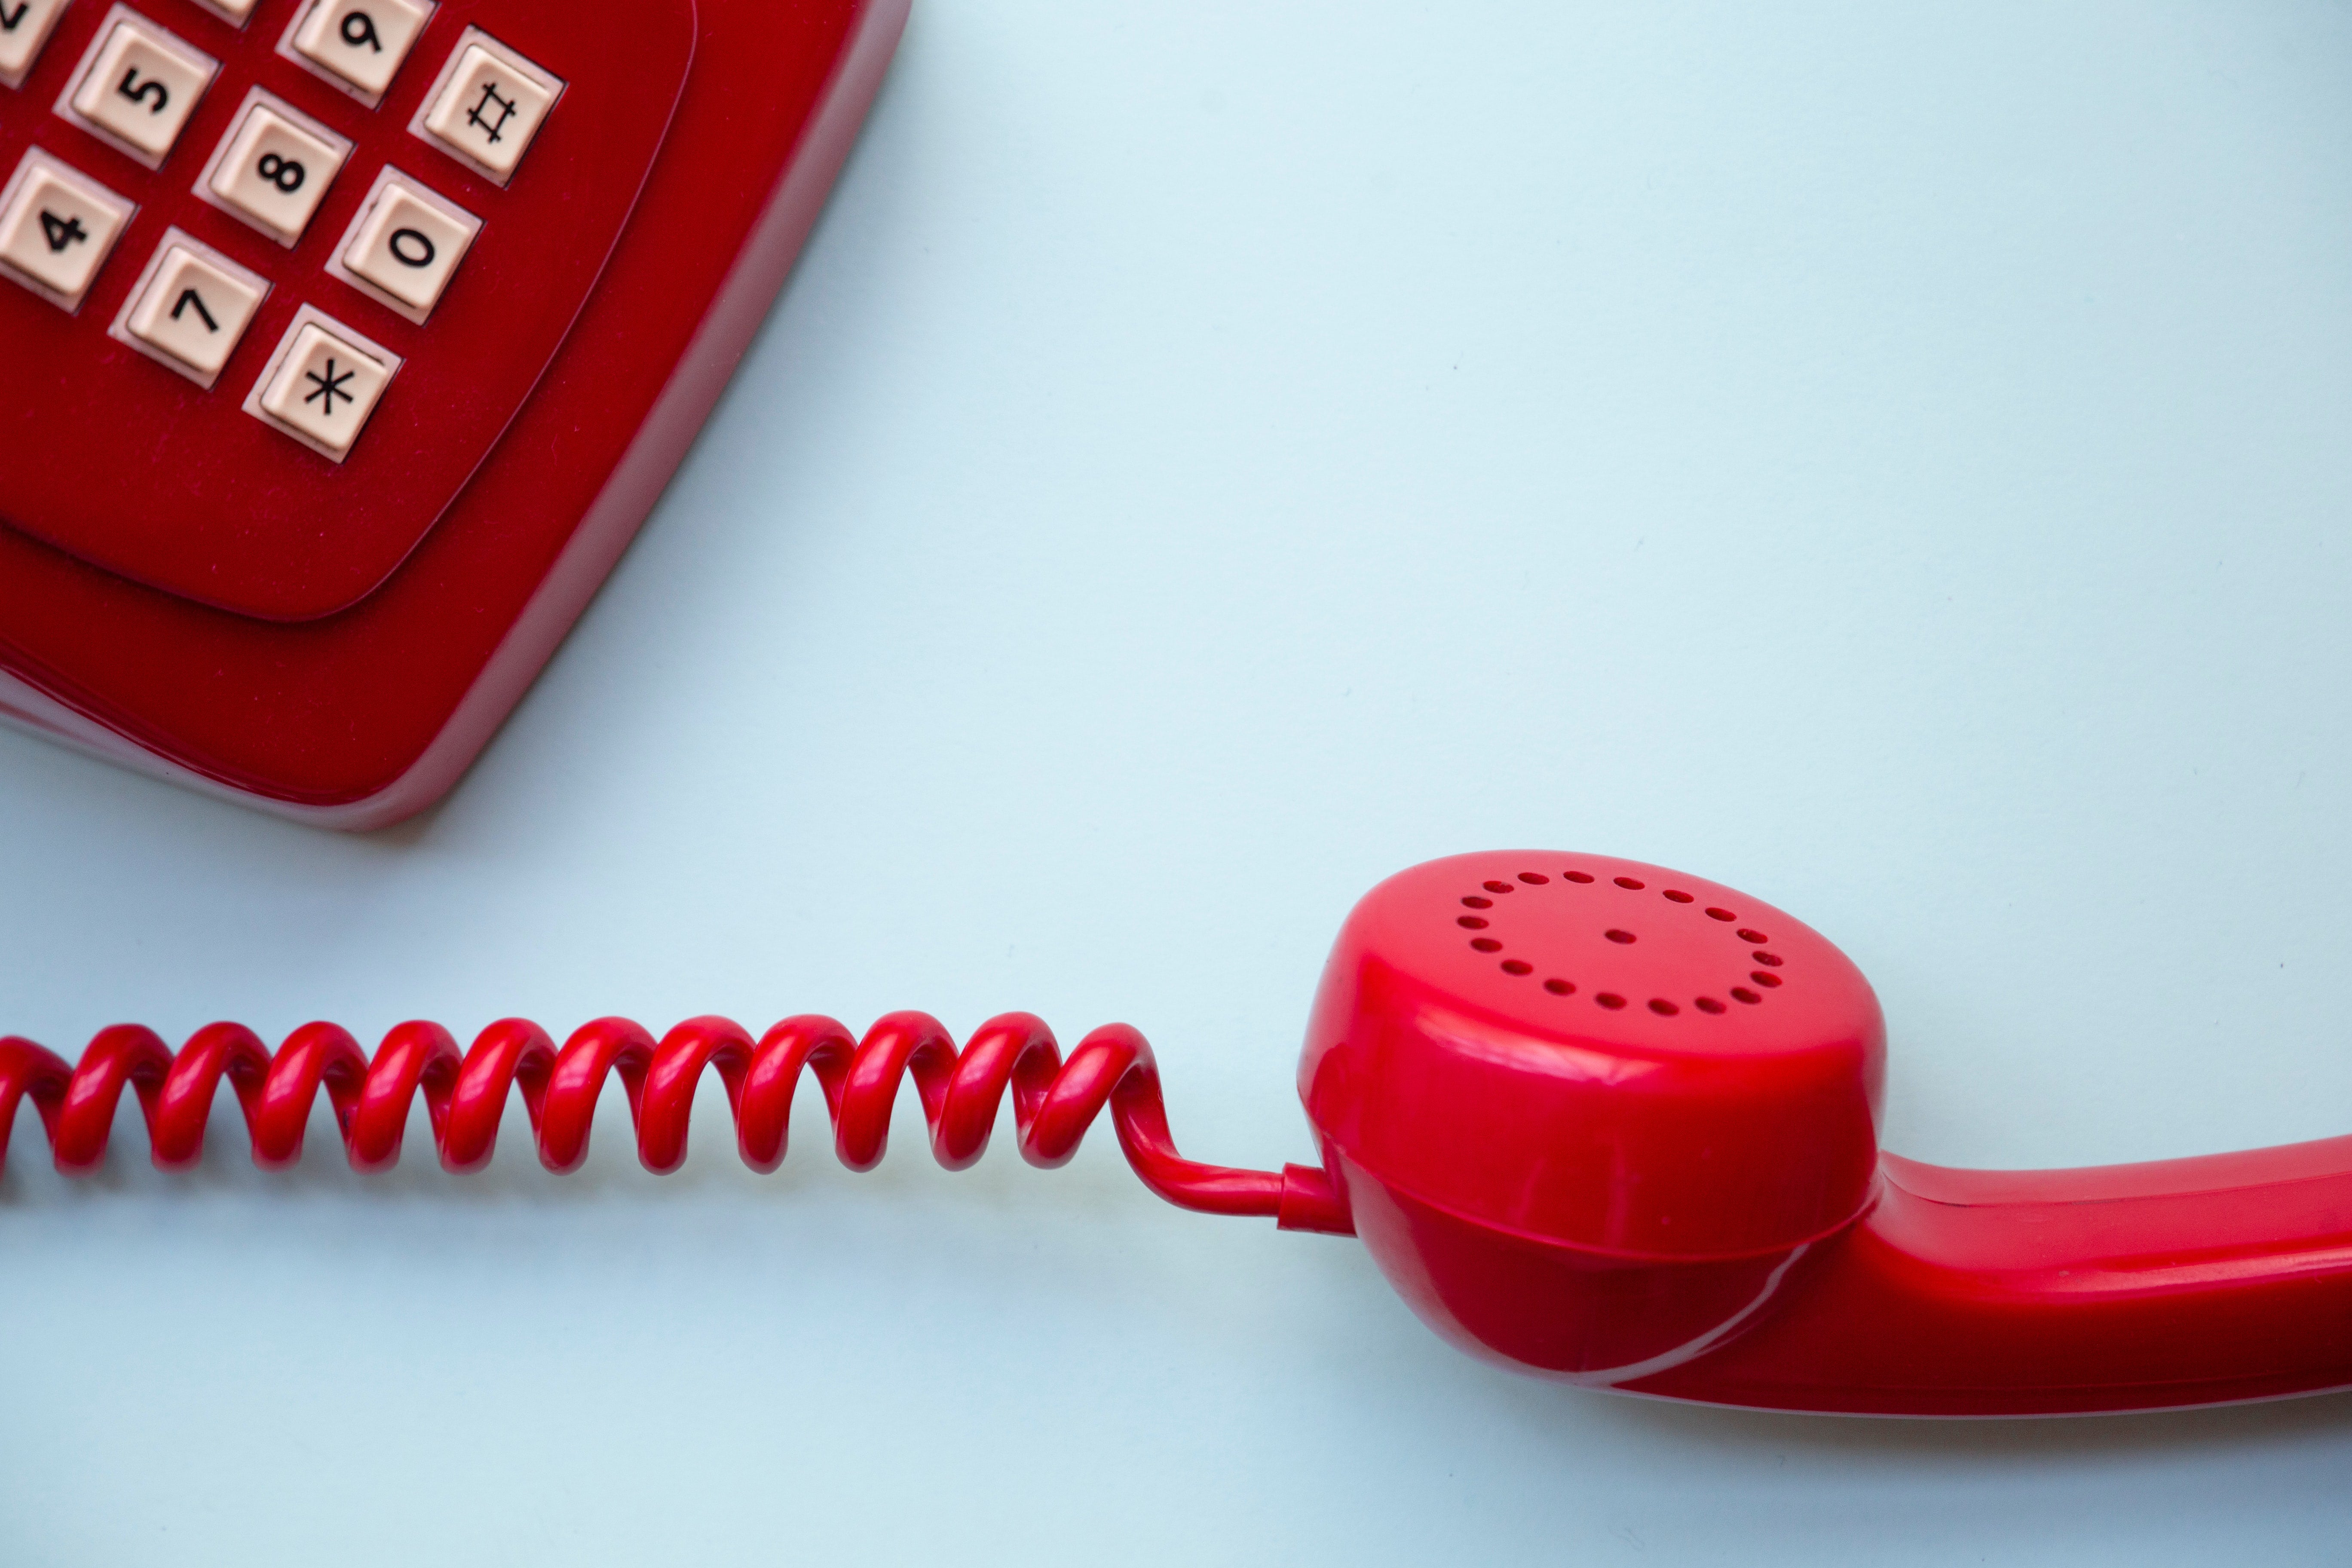 A red corded telephone